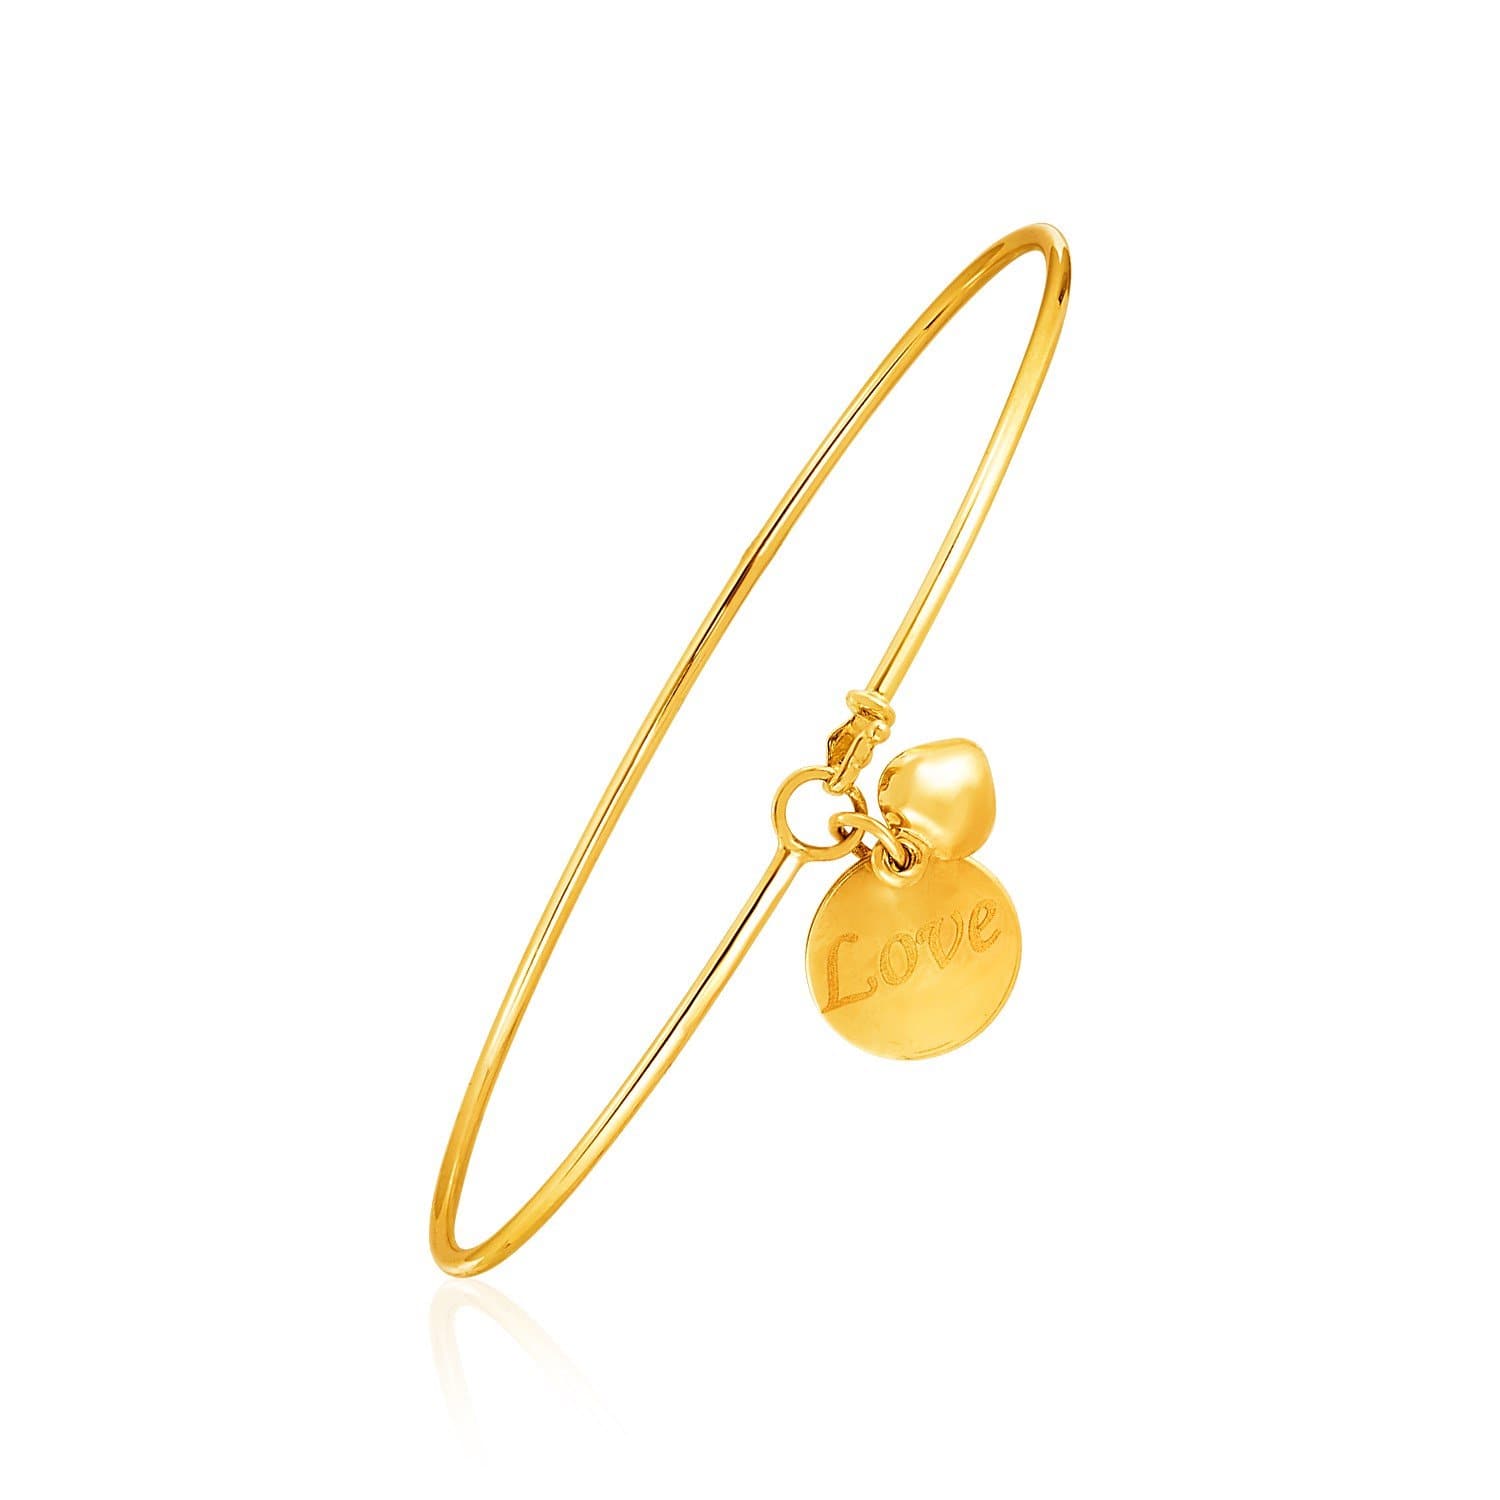 14k Yellow Gold Bangle with Engraved inchesLove inches and Puffed Heart Charms